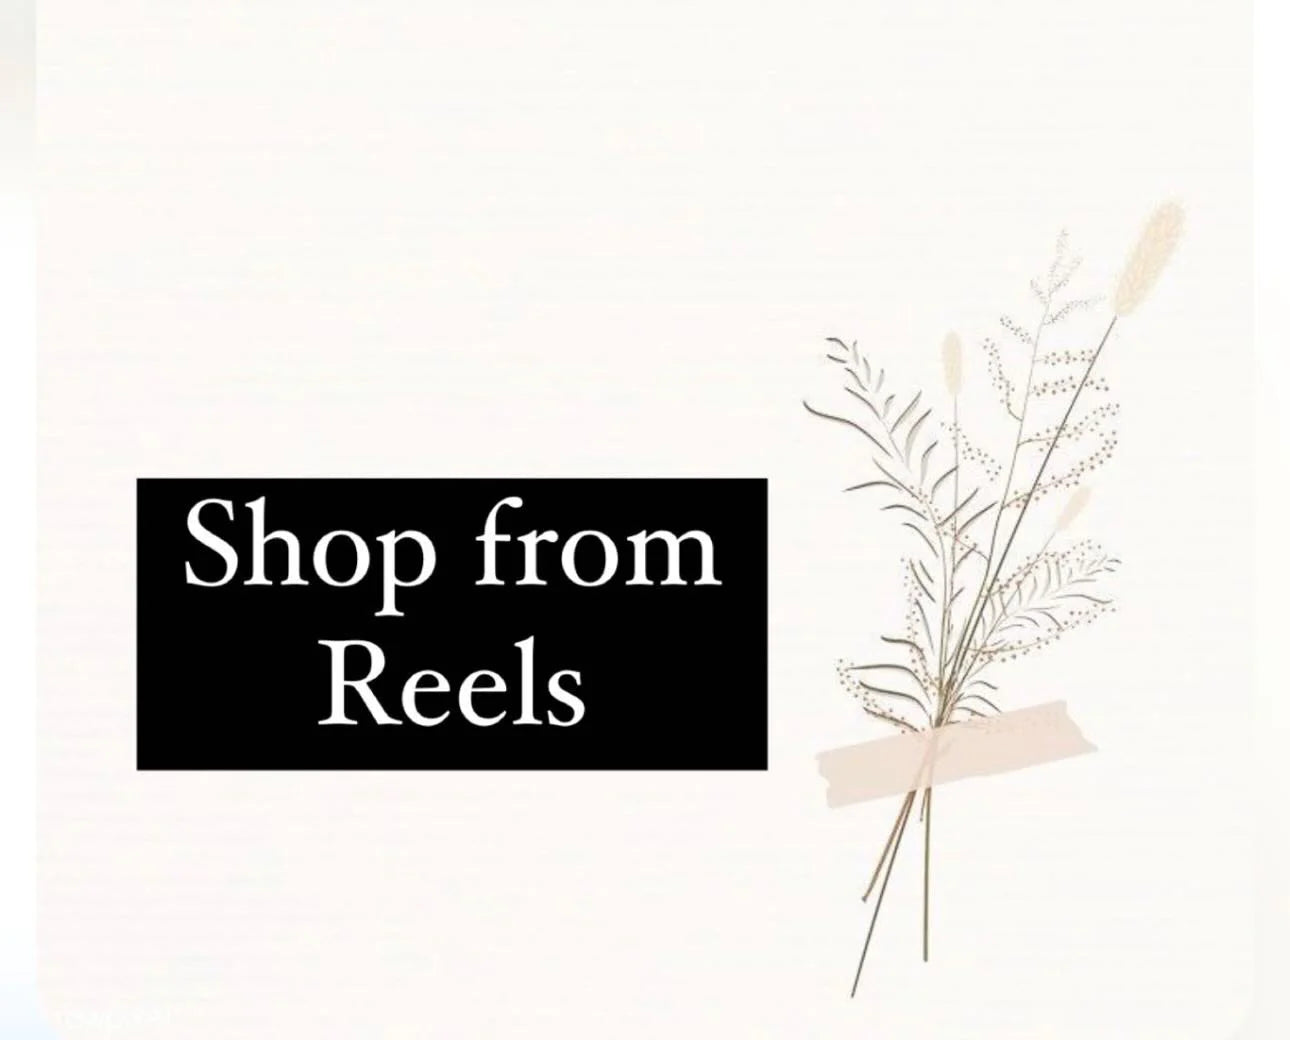 Shop from reels